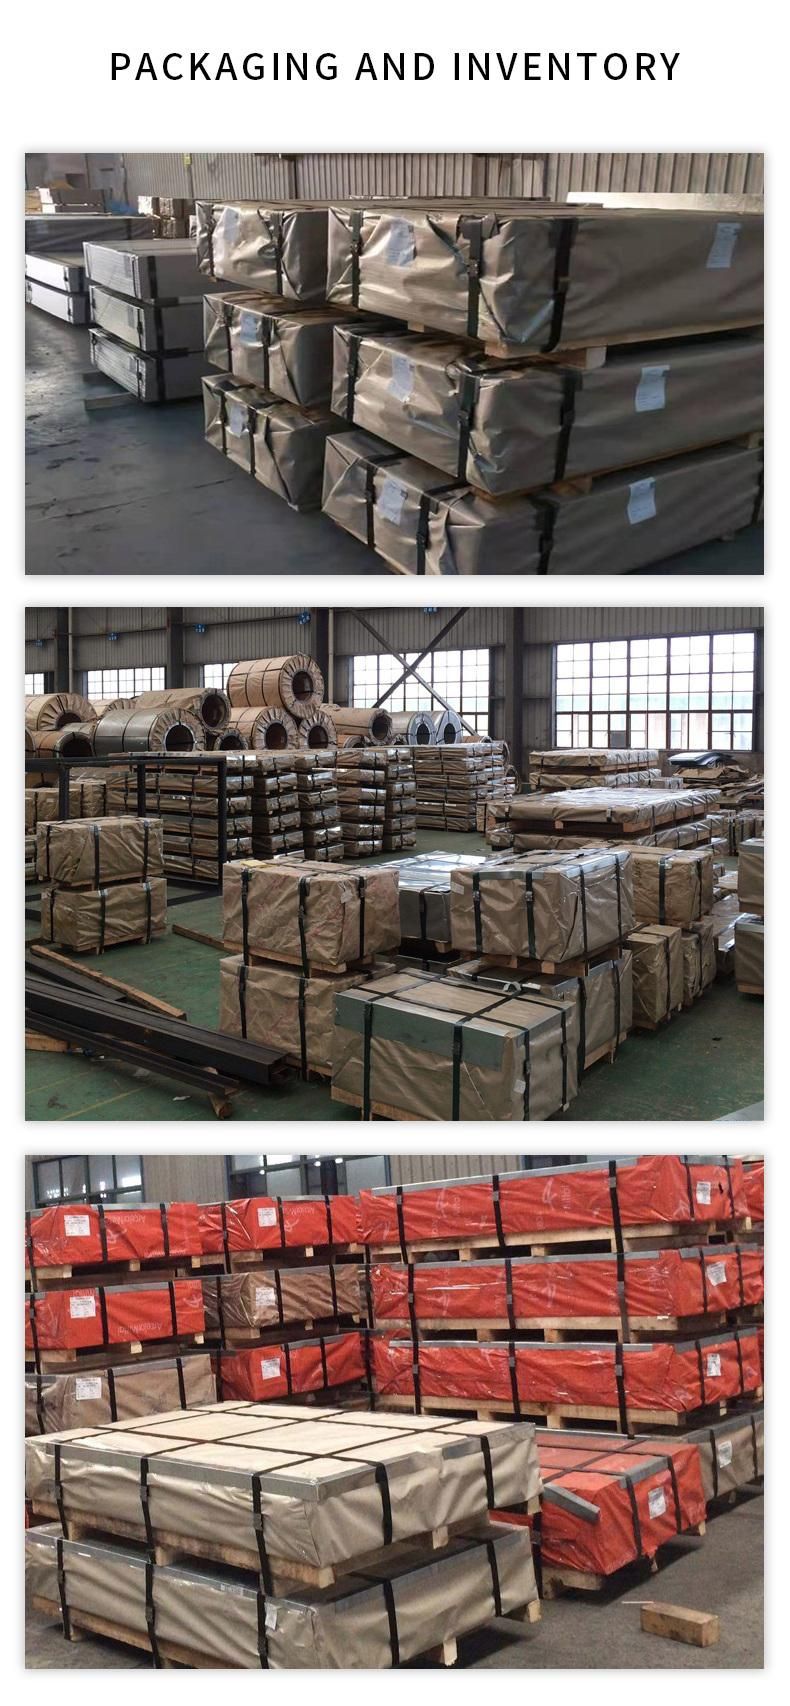 China Factory Steel Thickness 10-600mm S45c S50c 1050t Cold Rolled Carbon Steel Sheet / Plate Price